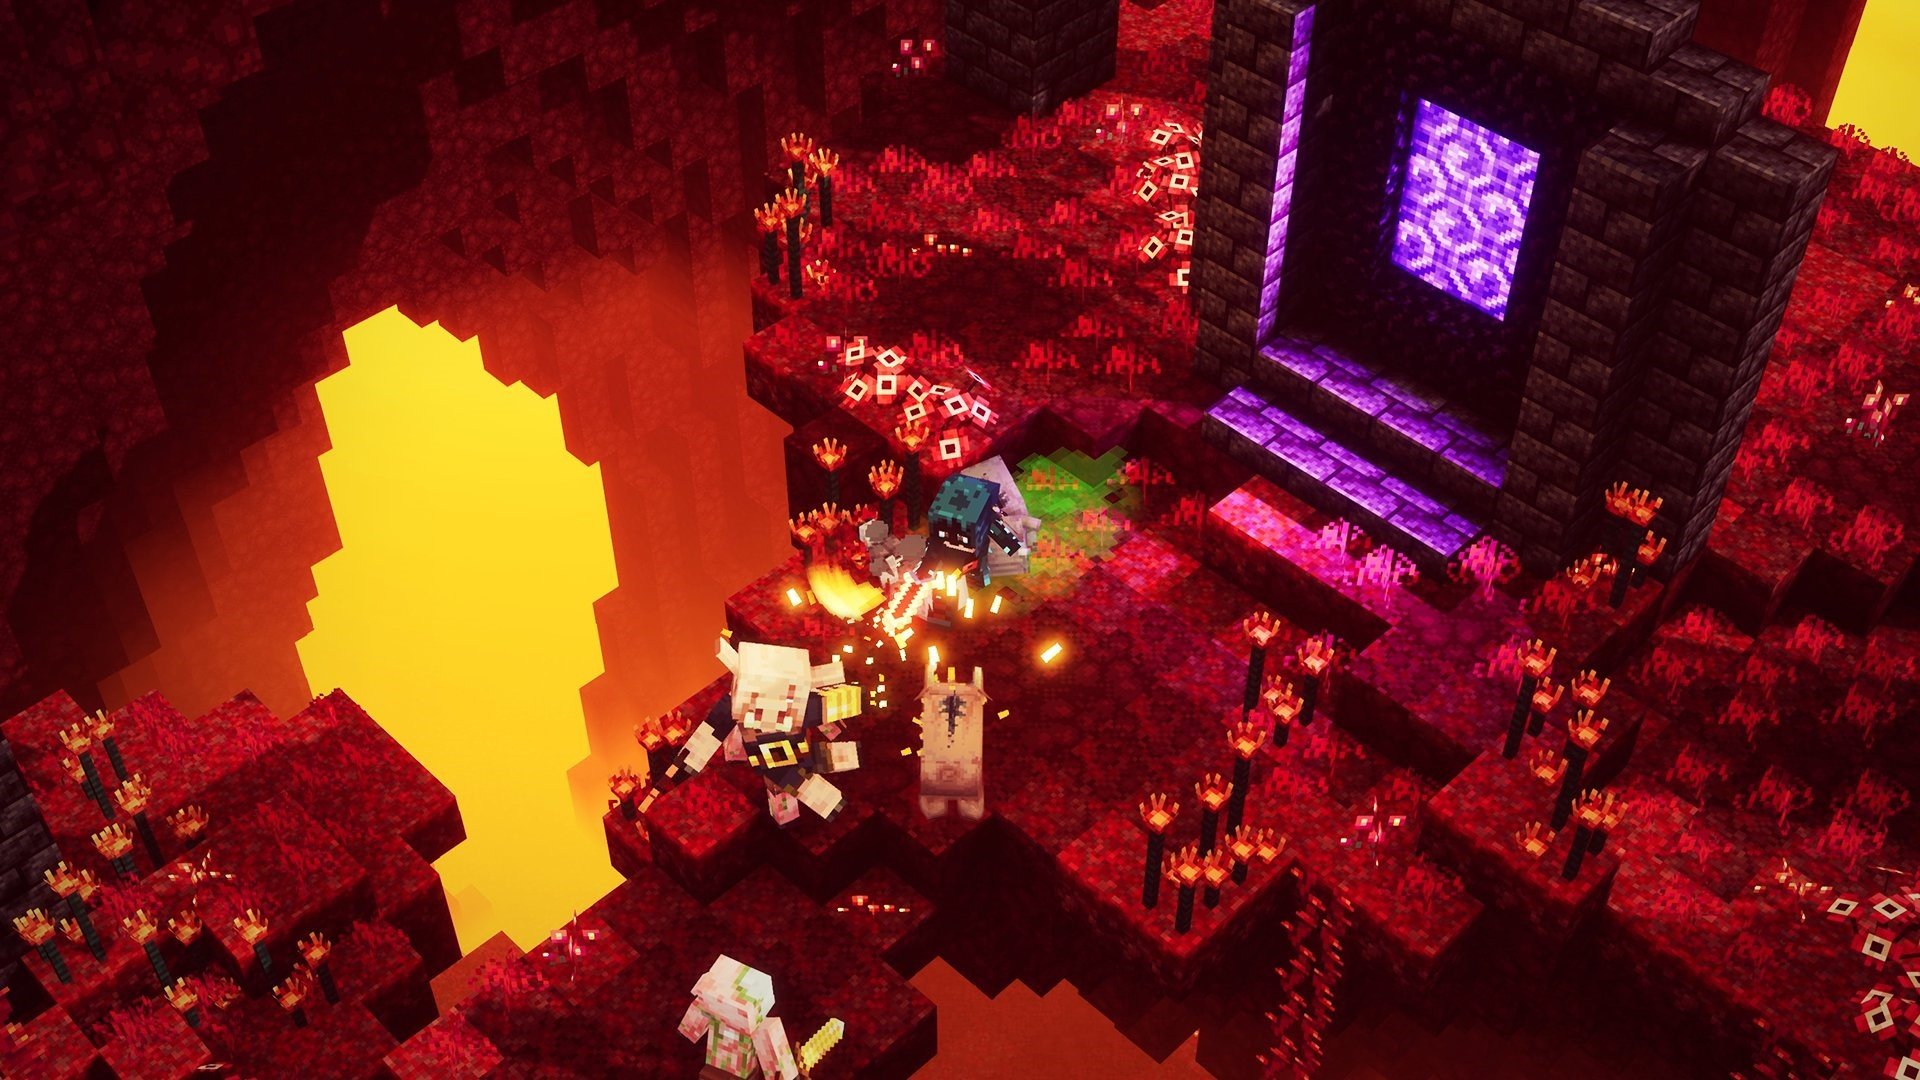 minecraft-dungeons-flames-of-the-nether-dlc-image-01.jpg